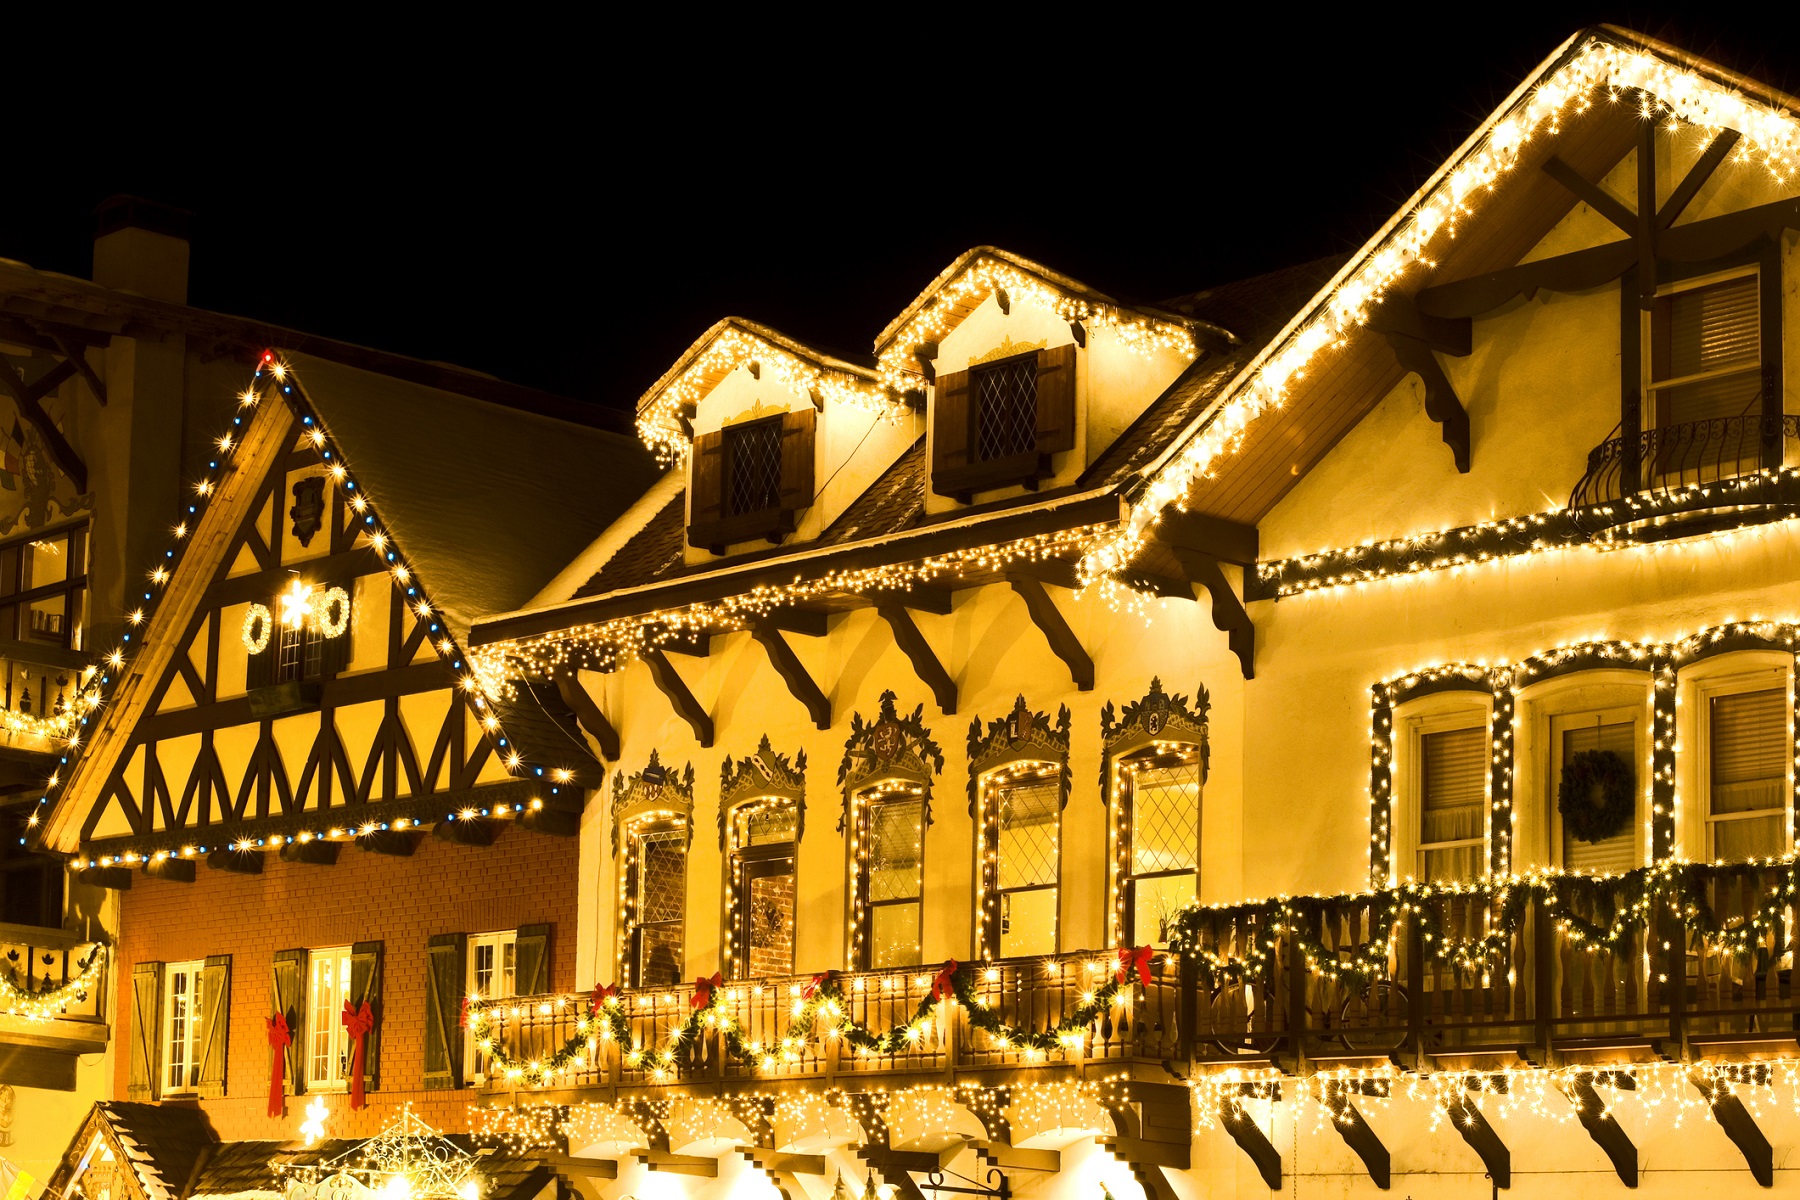 How to celebrate New Year's Eve in Leavenworth.